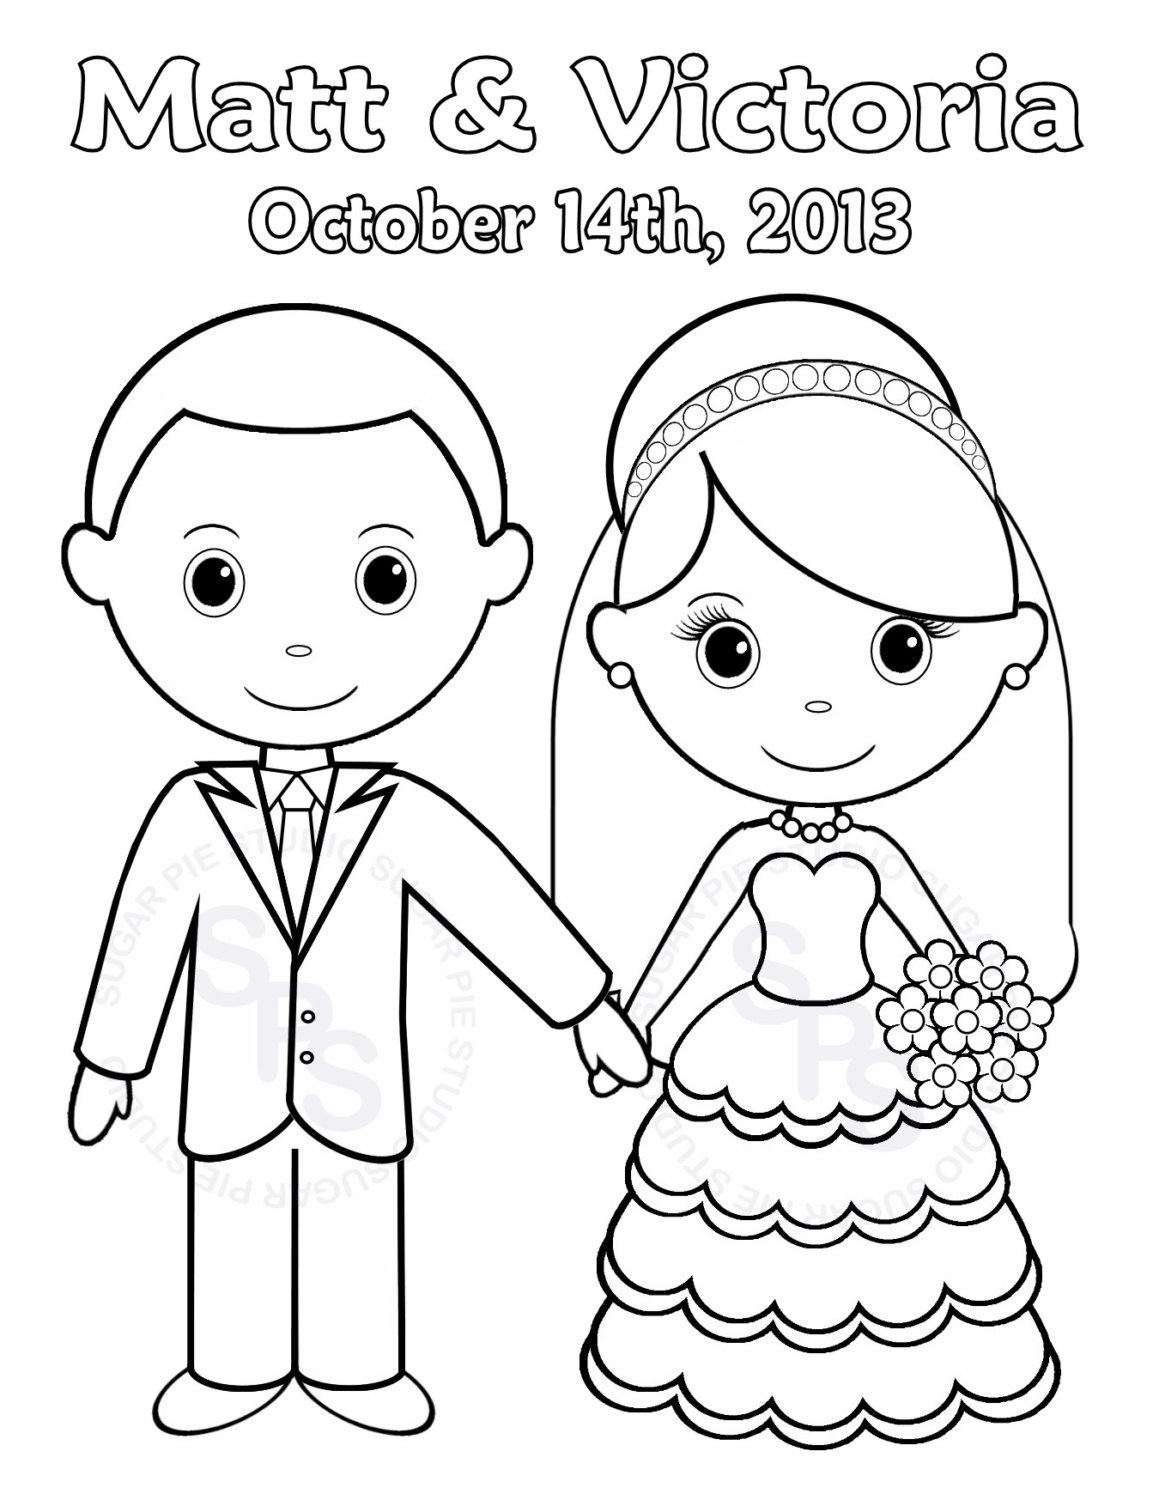 Coloring Pages : Coloring Pages Personalized To Print For Kids Free - Free Printable Personalized Children&amp;amp;#039;s Books